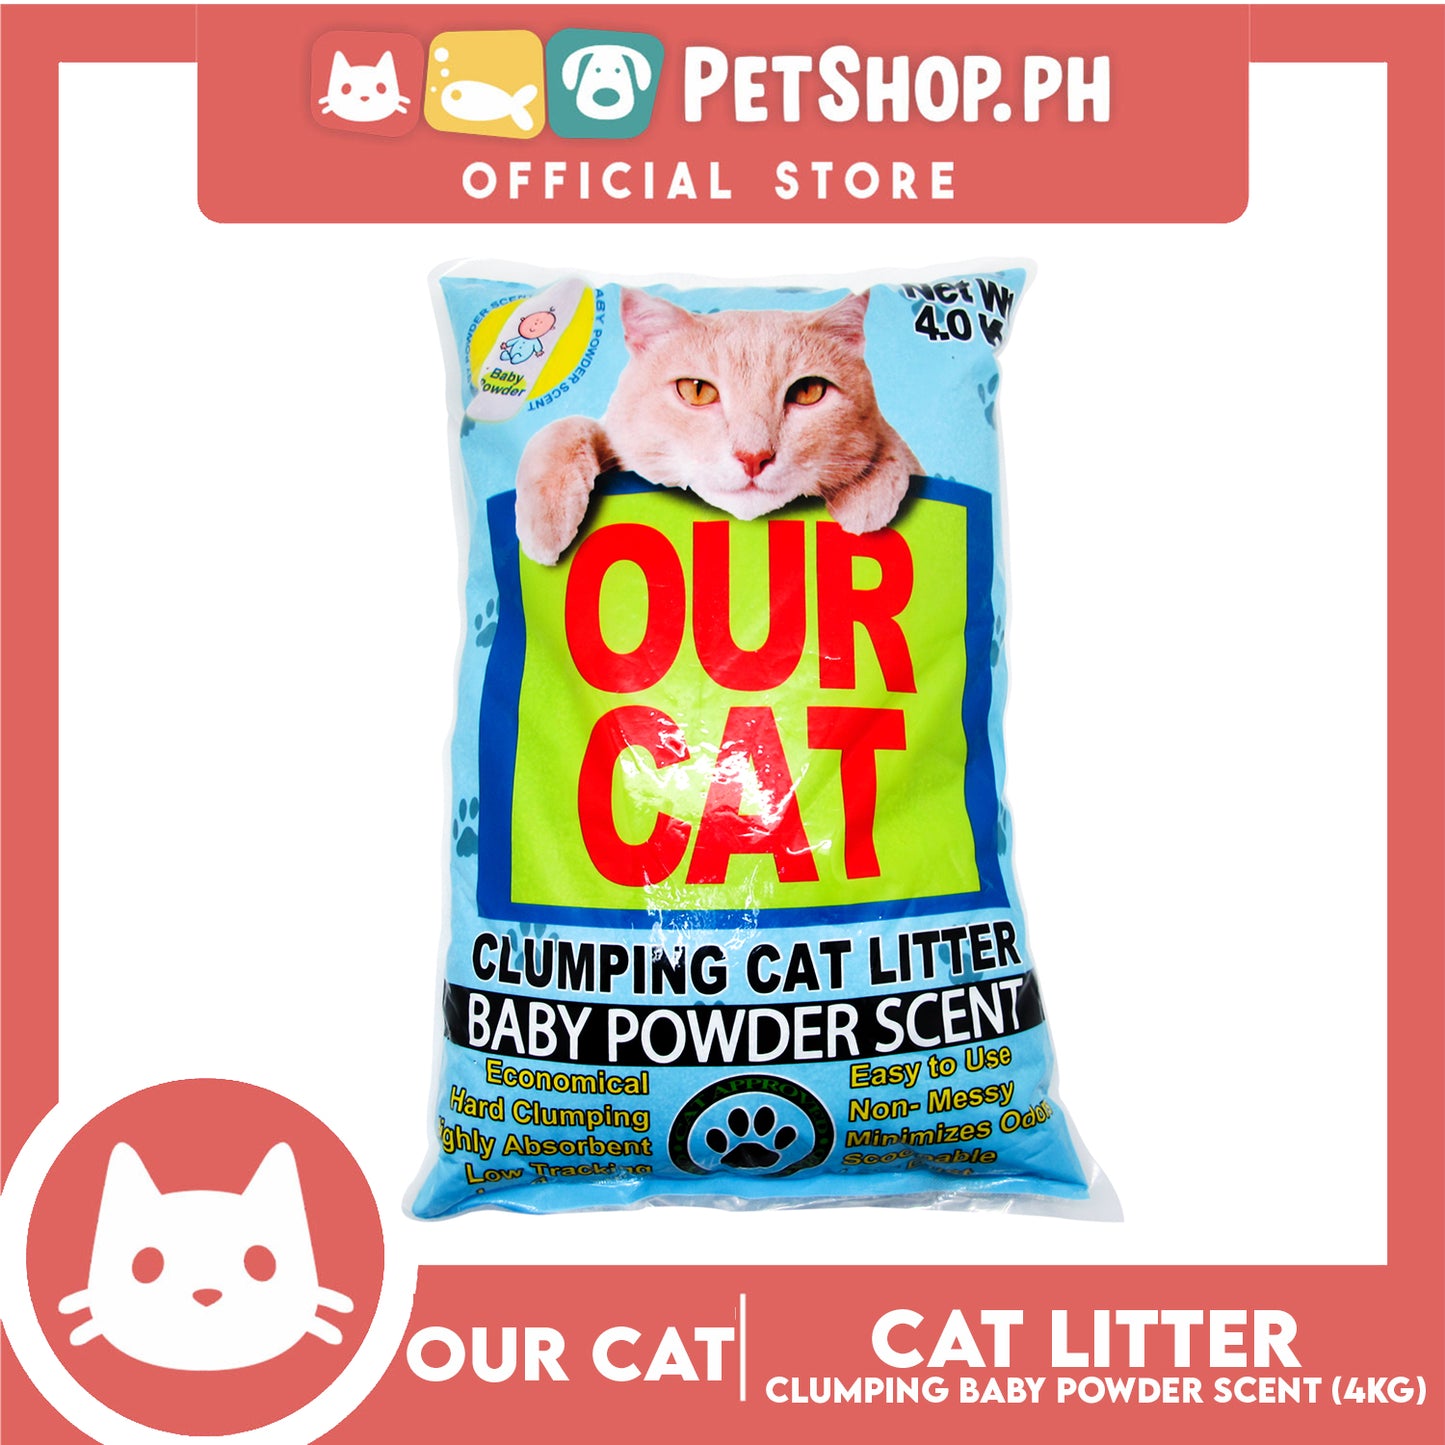 Our Cat Clumping Cat Litter Baby Powder Scent 4kg